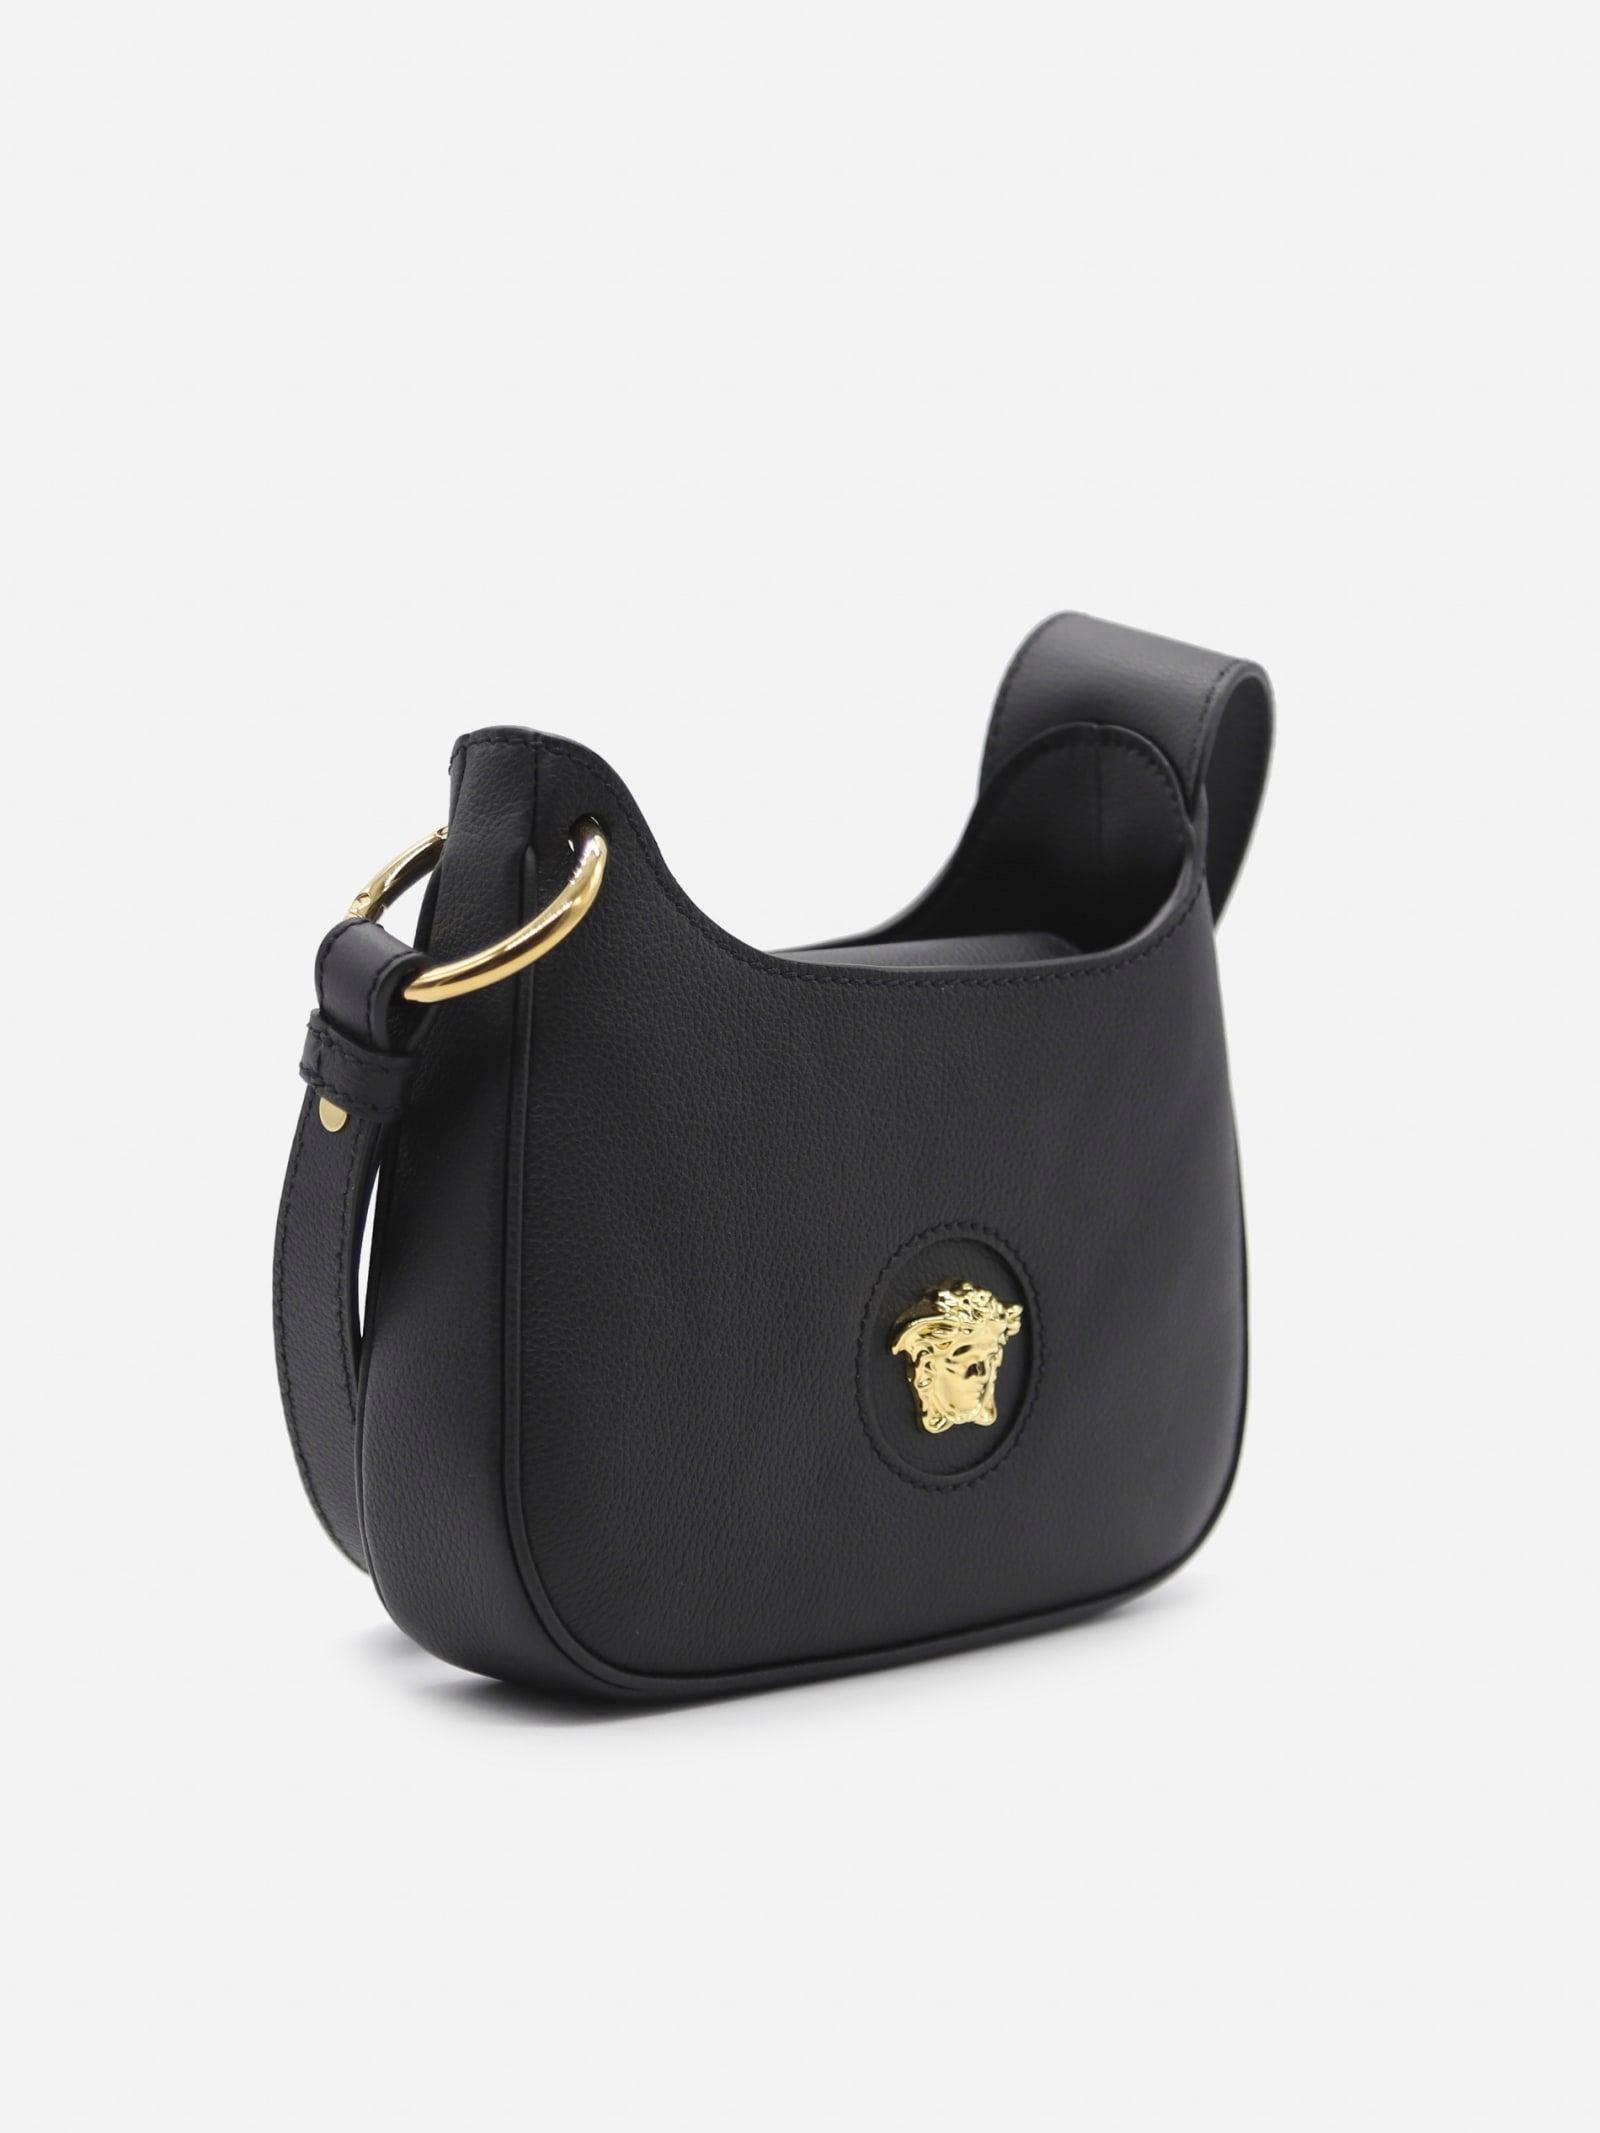 Womens Hobo bags and purses Versace Hobo bags and purses Versace La Medusa Small Leather Hobo Bag in Black Save 53% 